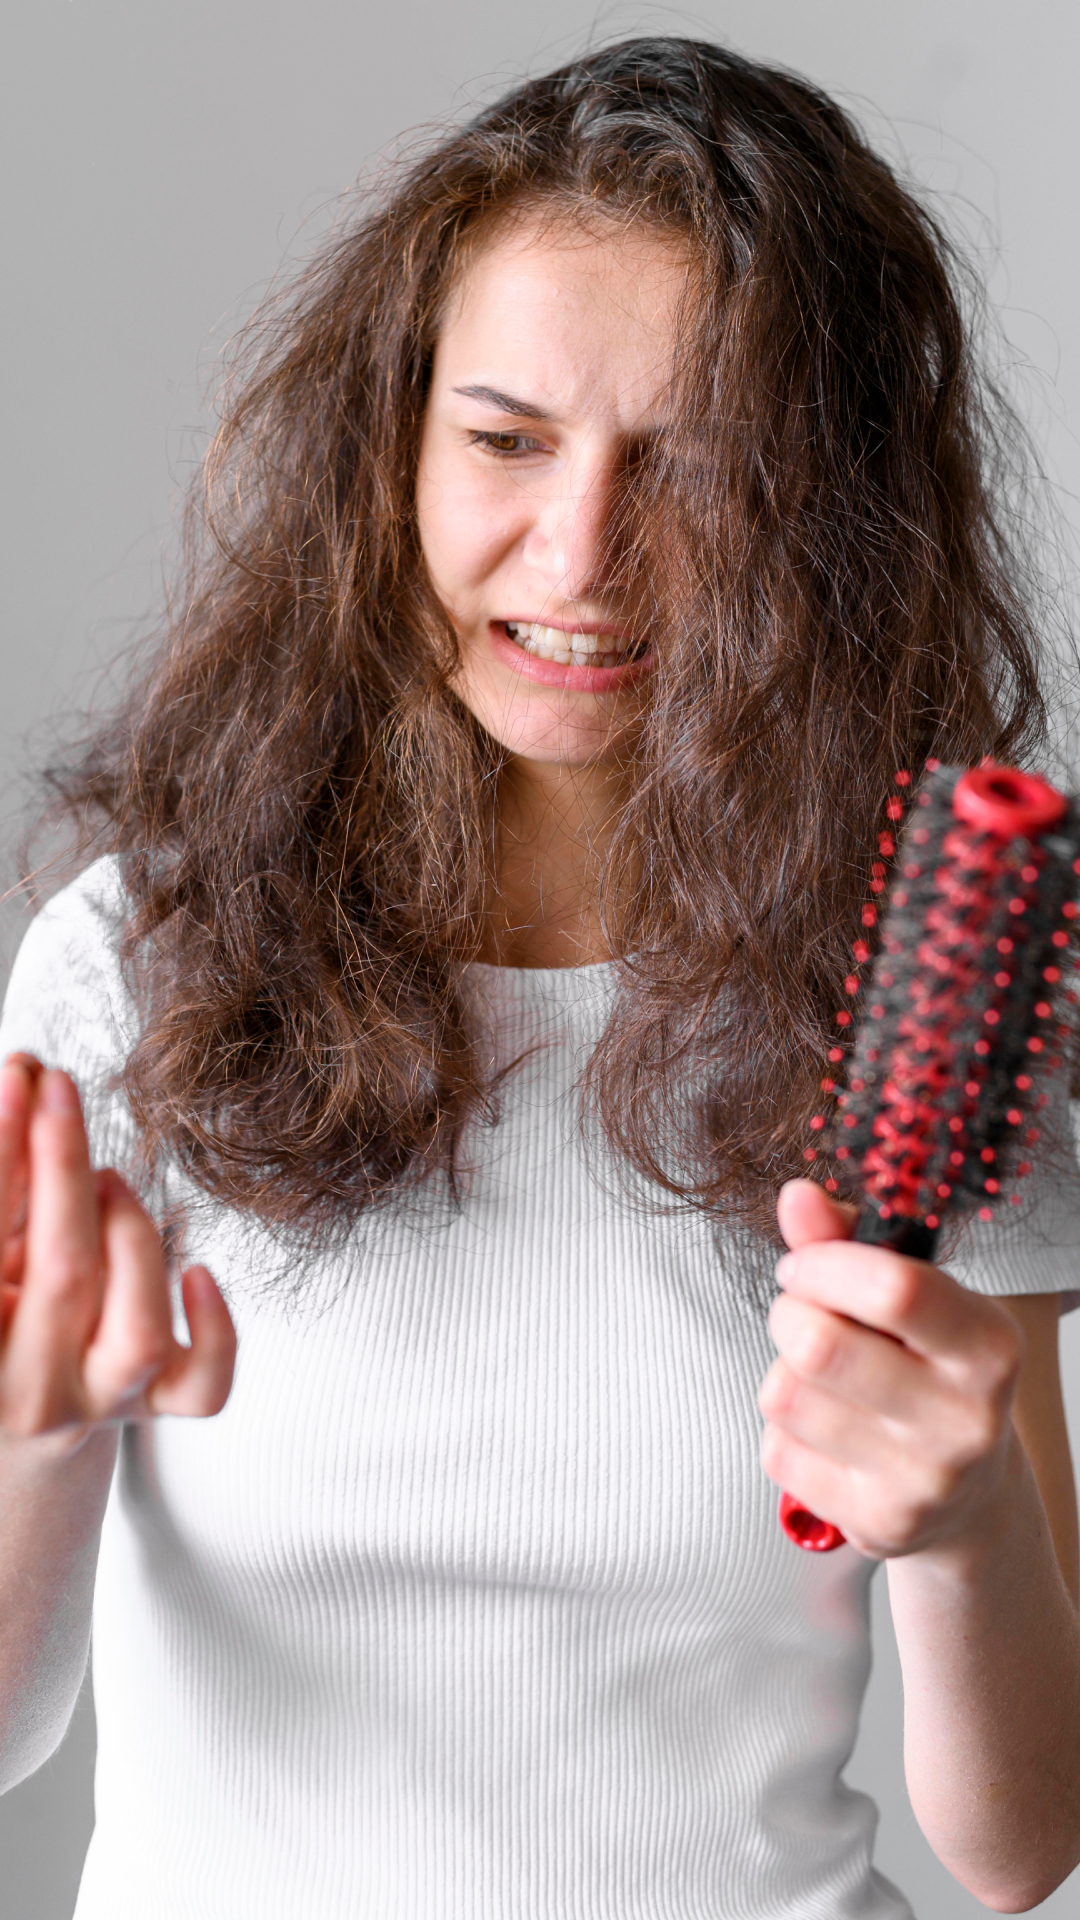 5 unhealthy eating practices causing your hair loss